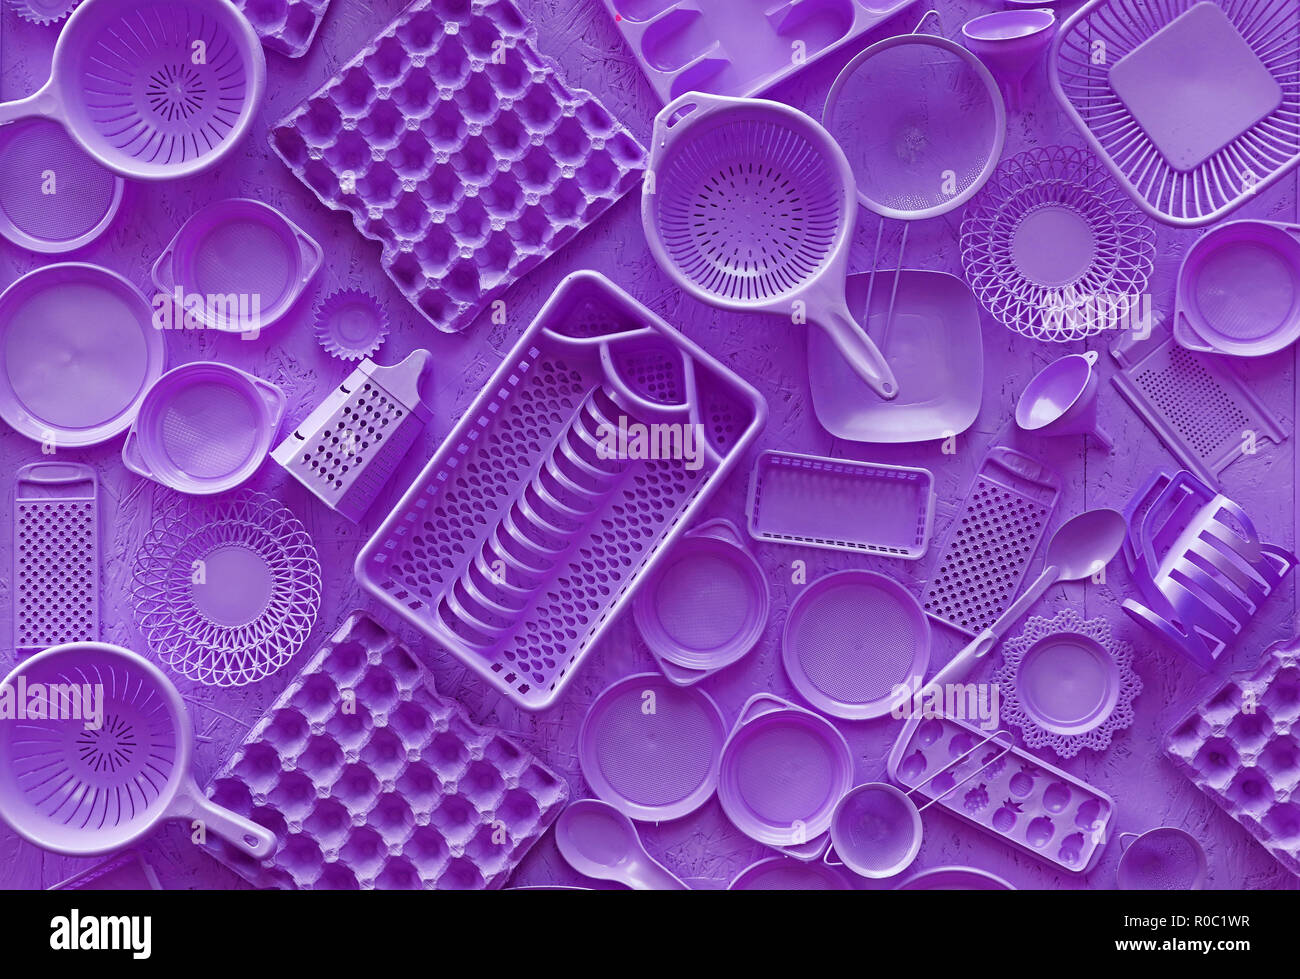 https://c8.alamy.com/comp/R0C1WR/close-up-flat-lay-of-different-purple-violet-color-painted-kitchen-utensils-and-tools-grater-spoon-egg-carton-plastic-disposable-plates-elevated-R0C1WR.jpg